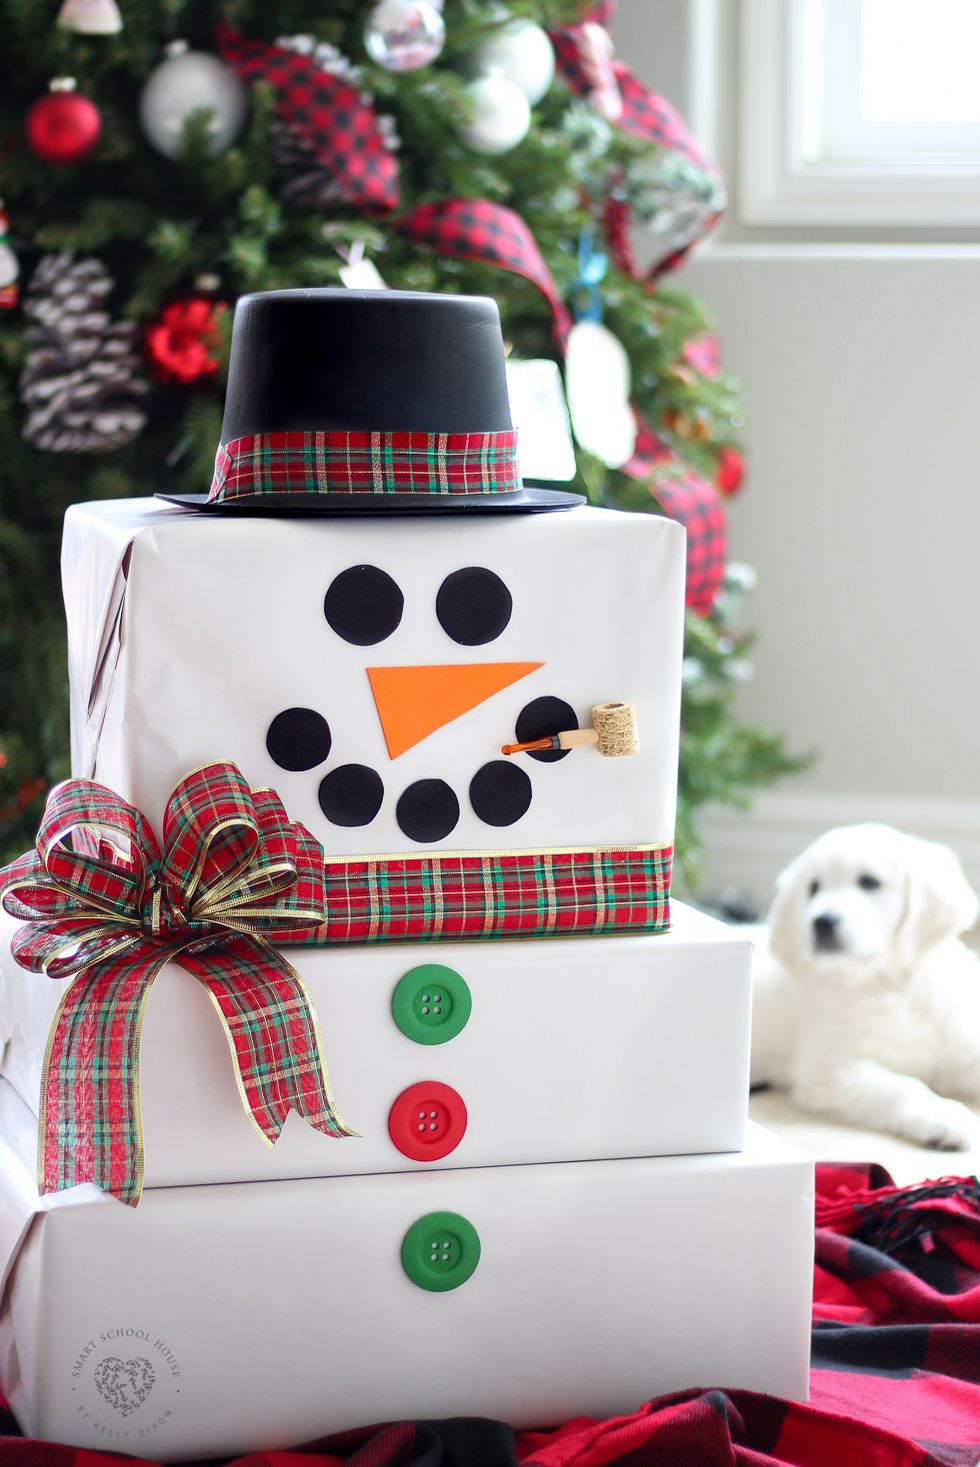 Creative and Festive Gift Wrapping Ideas for the Holidays